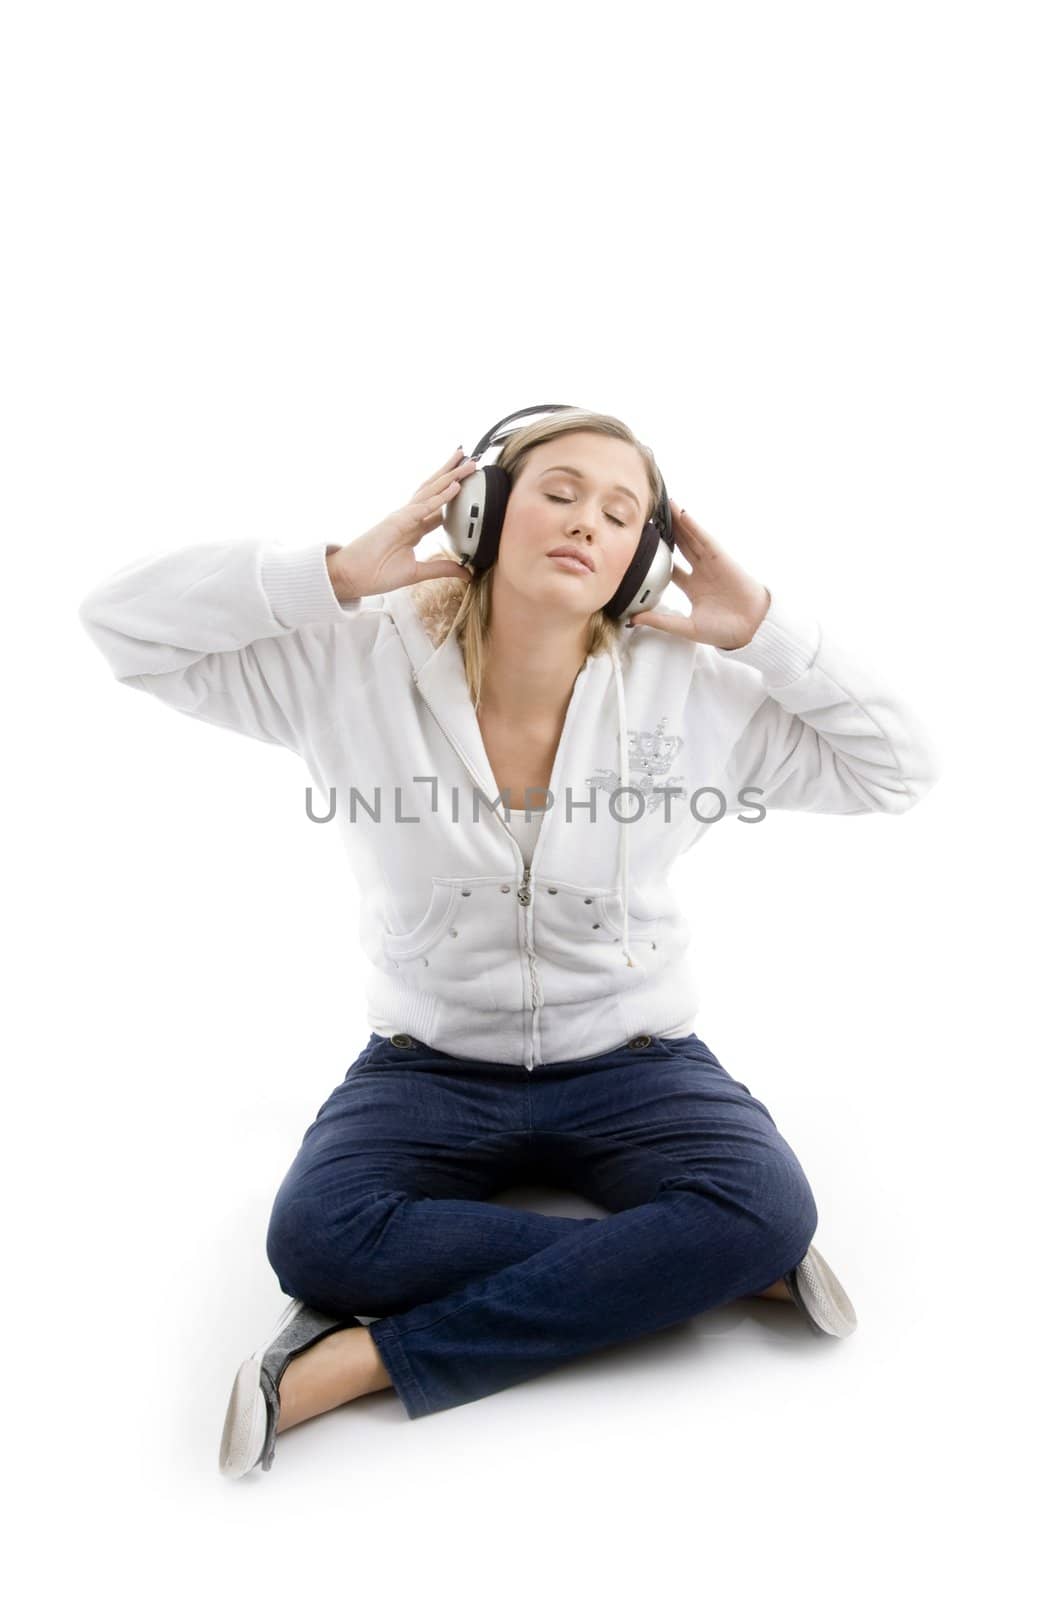 young model listening music with headphones by imagerymajestic